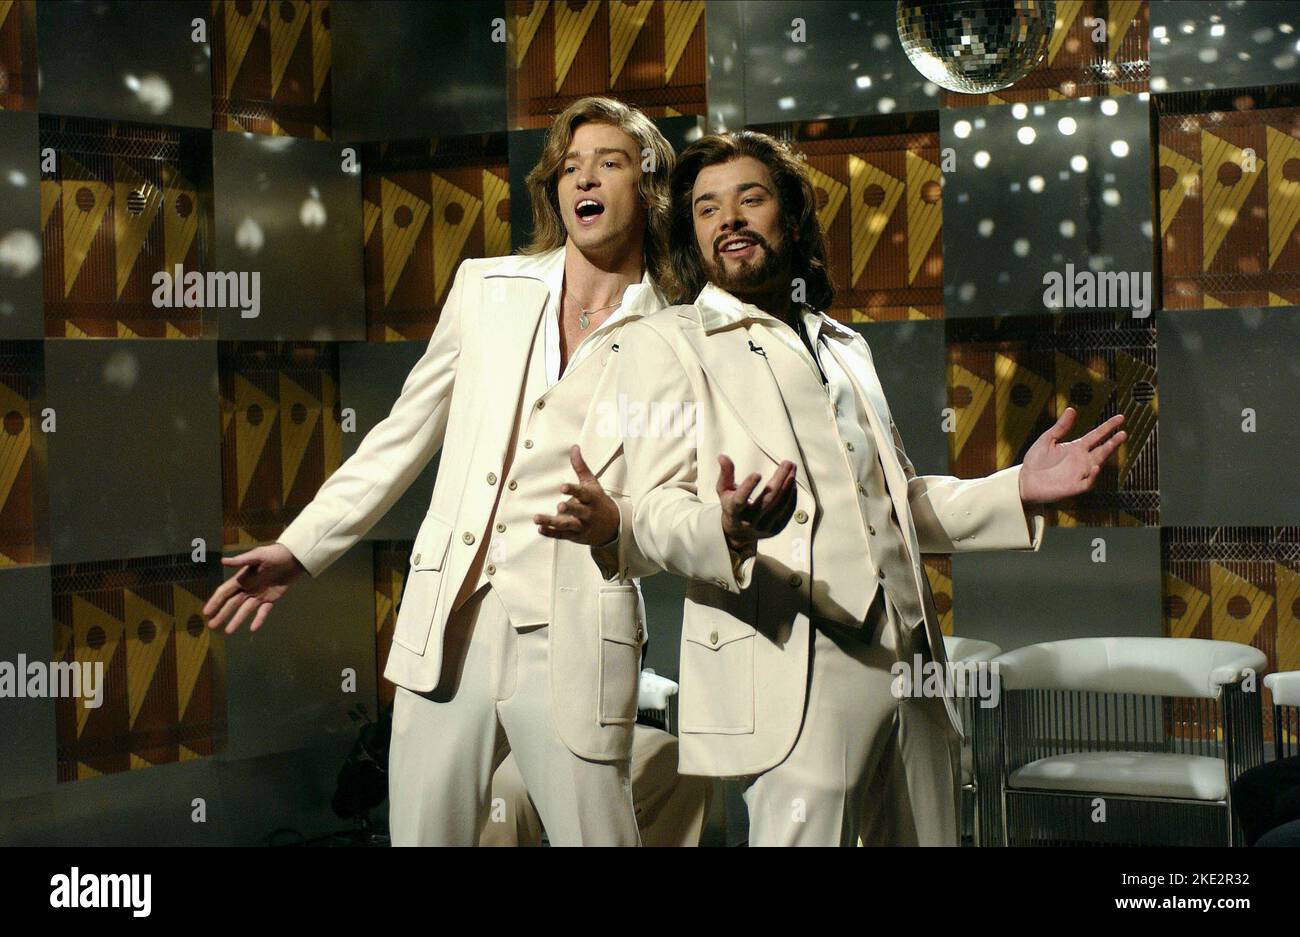 SAMSTAGABEND LIVE, JUSTIN TIMBERLAKE (ALS ROBIN GIBB), JIMMY FALLON (ALS BARRY GIBB) BEE GEES, 2003 Stockfoto